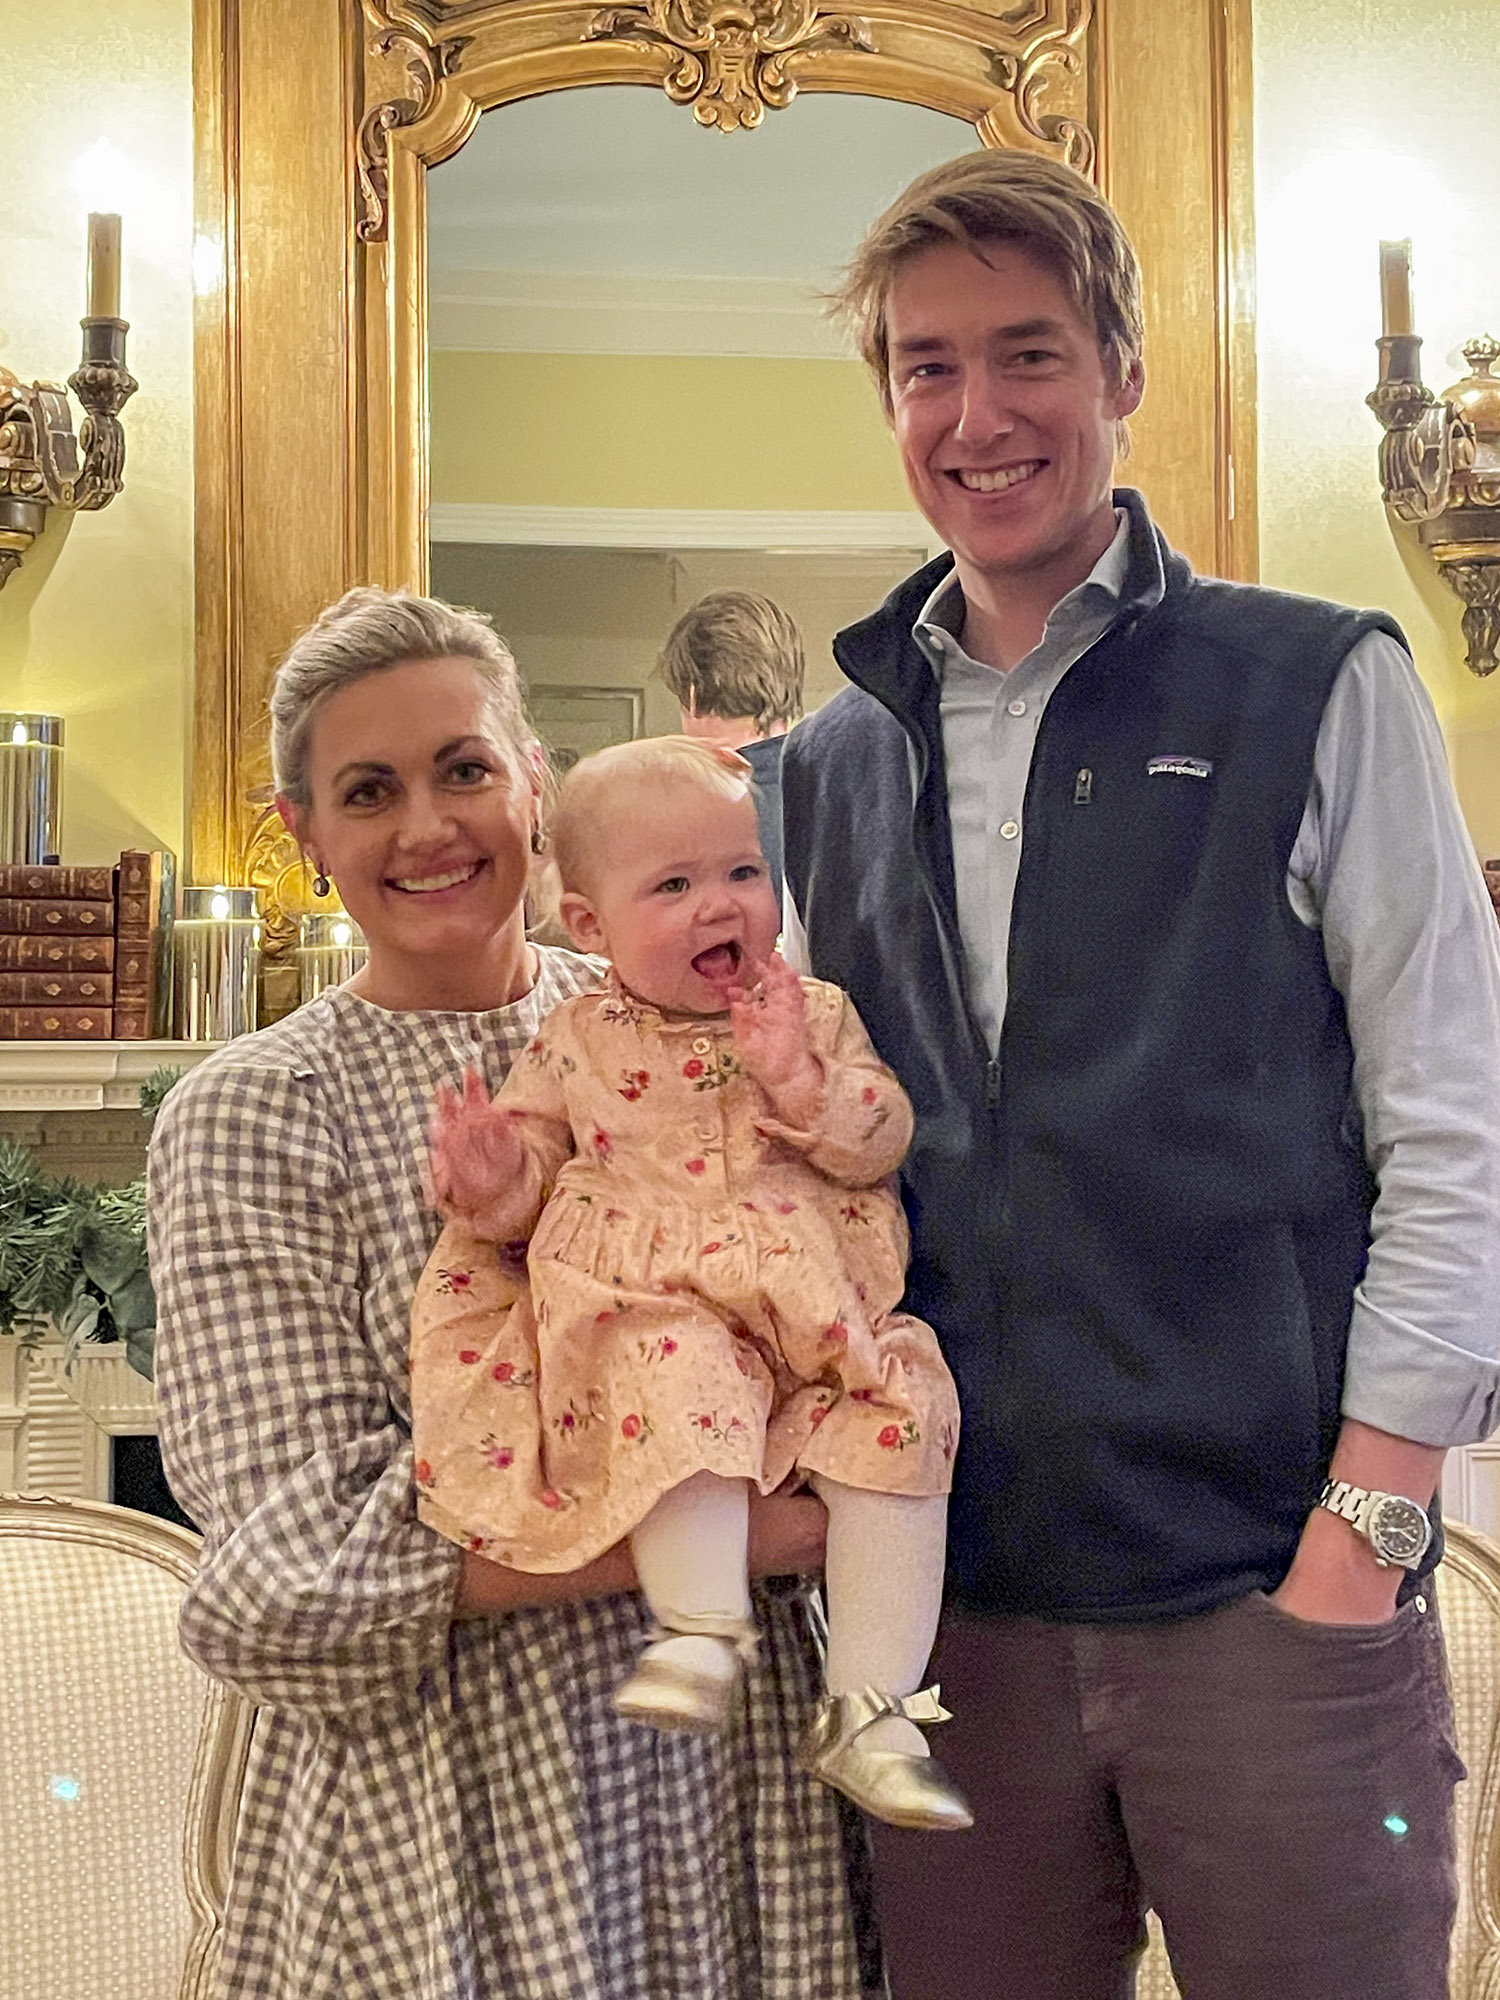 Gunter with his wife, Kate, and 10-month-old daughter, Edie